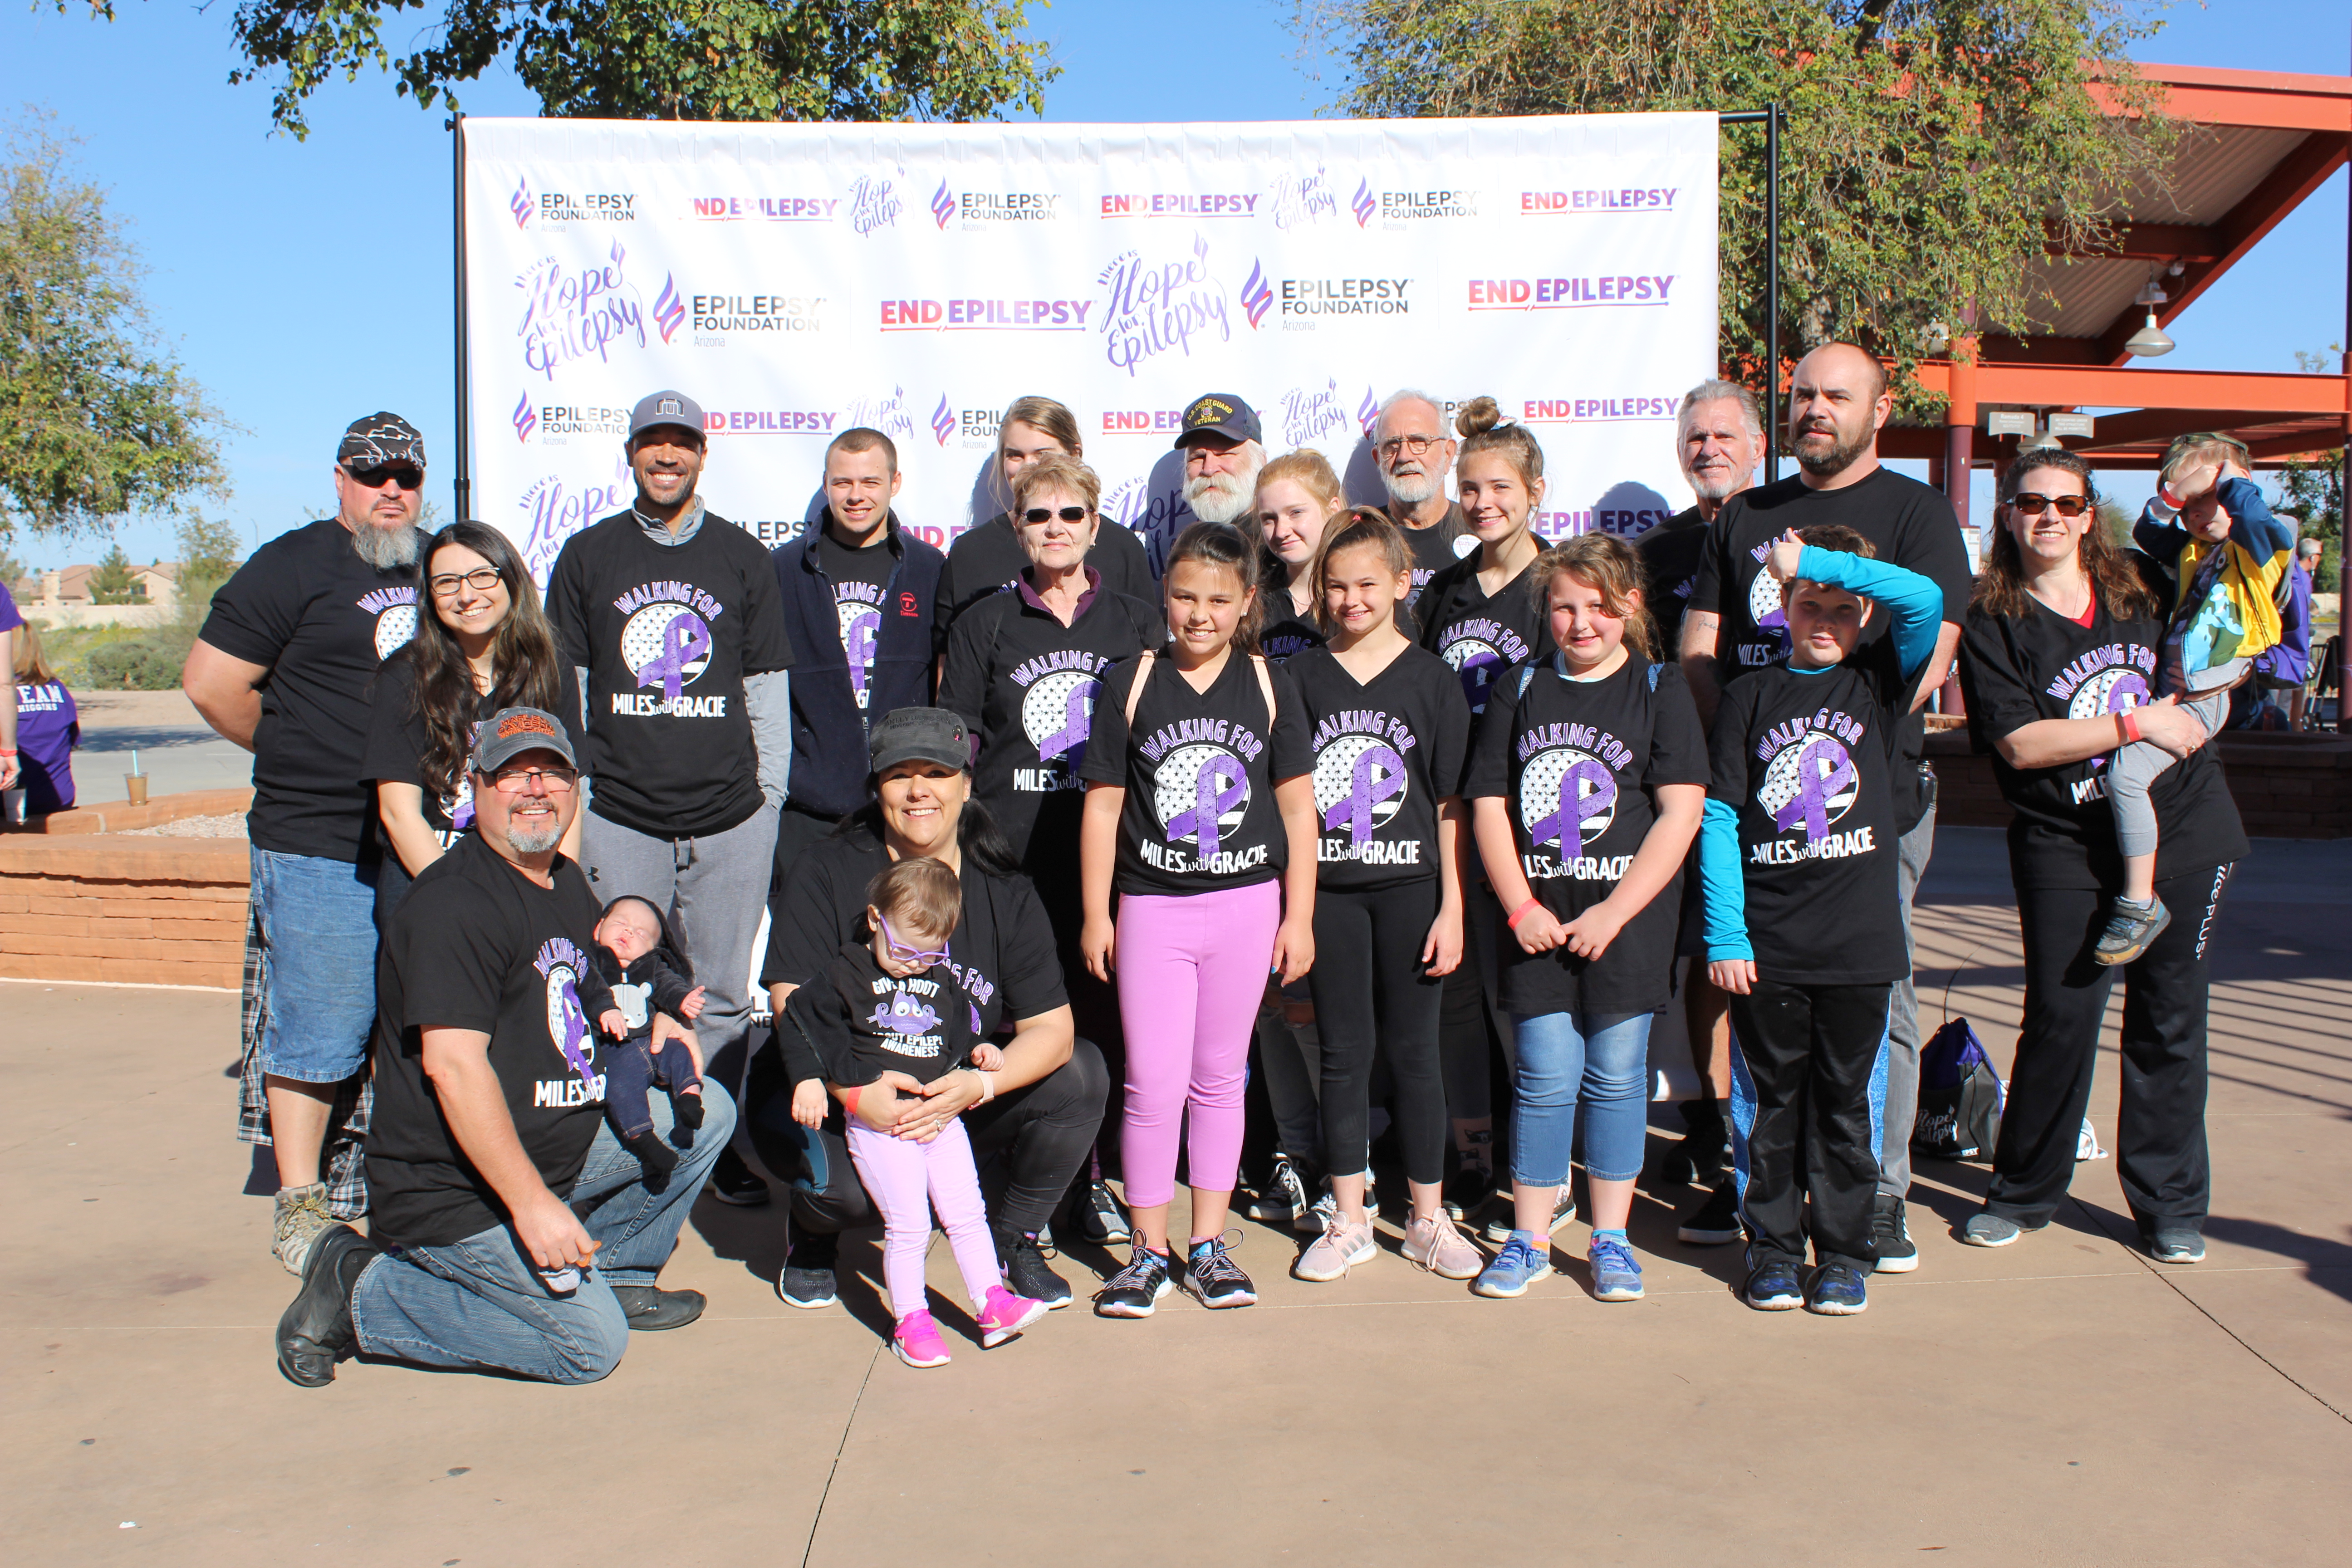 Walk to End Epilepsy – JOIN US IN THIS NATIONWIDE MOVEMENT